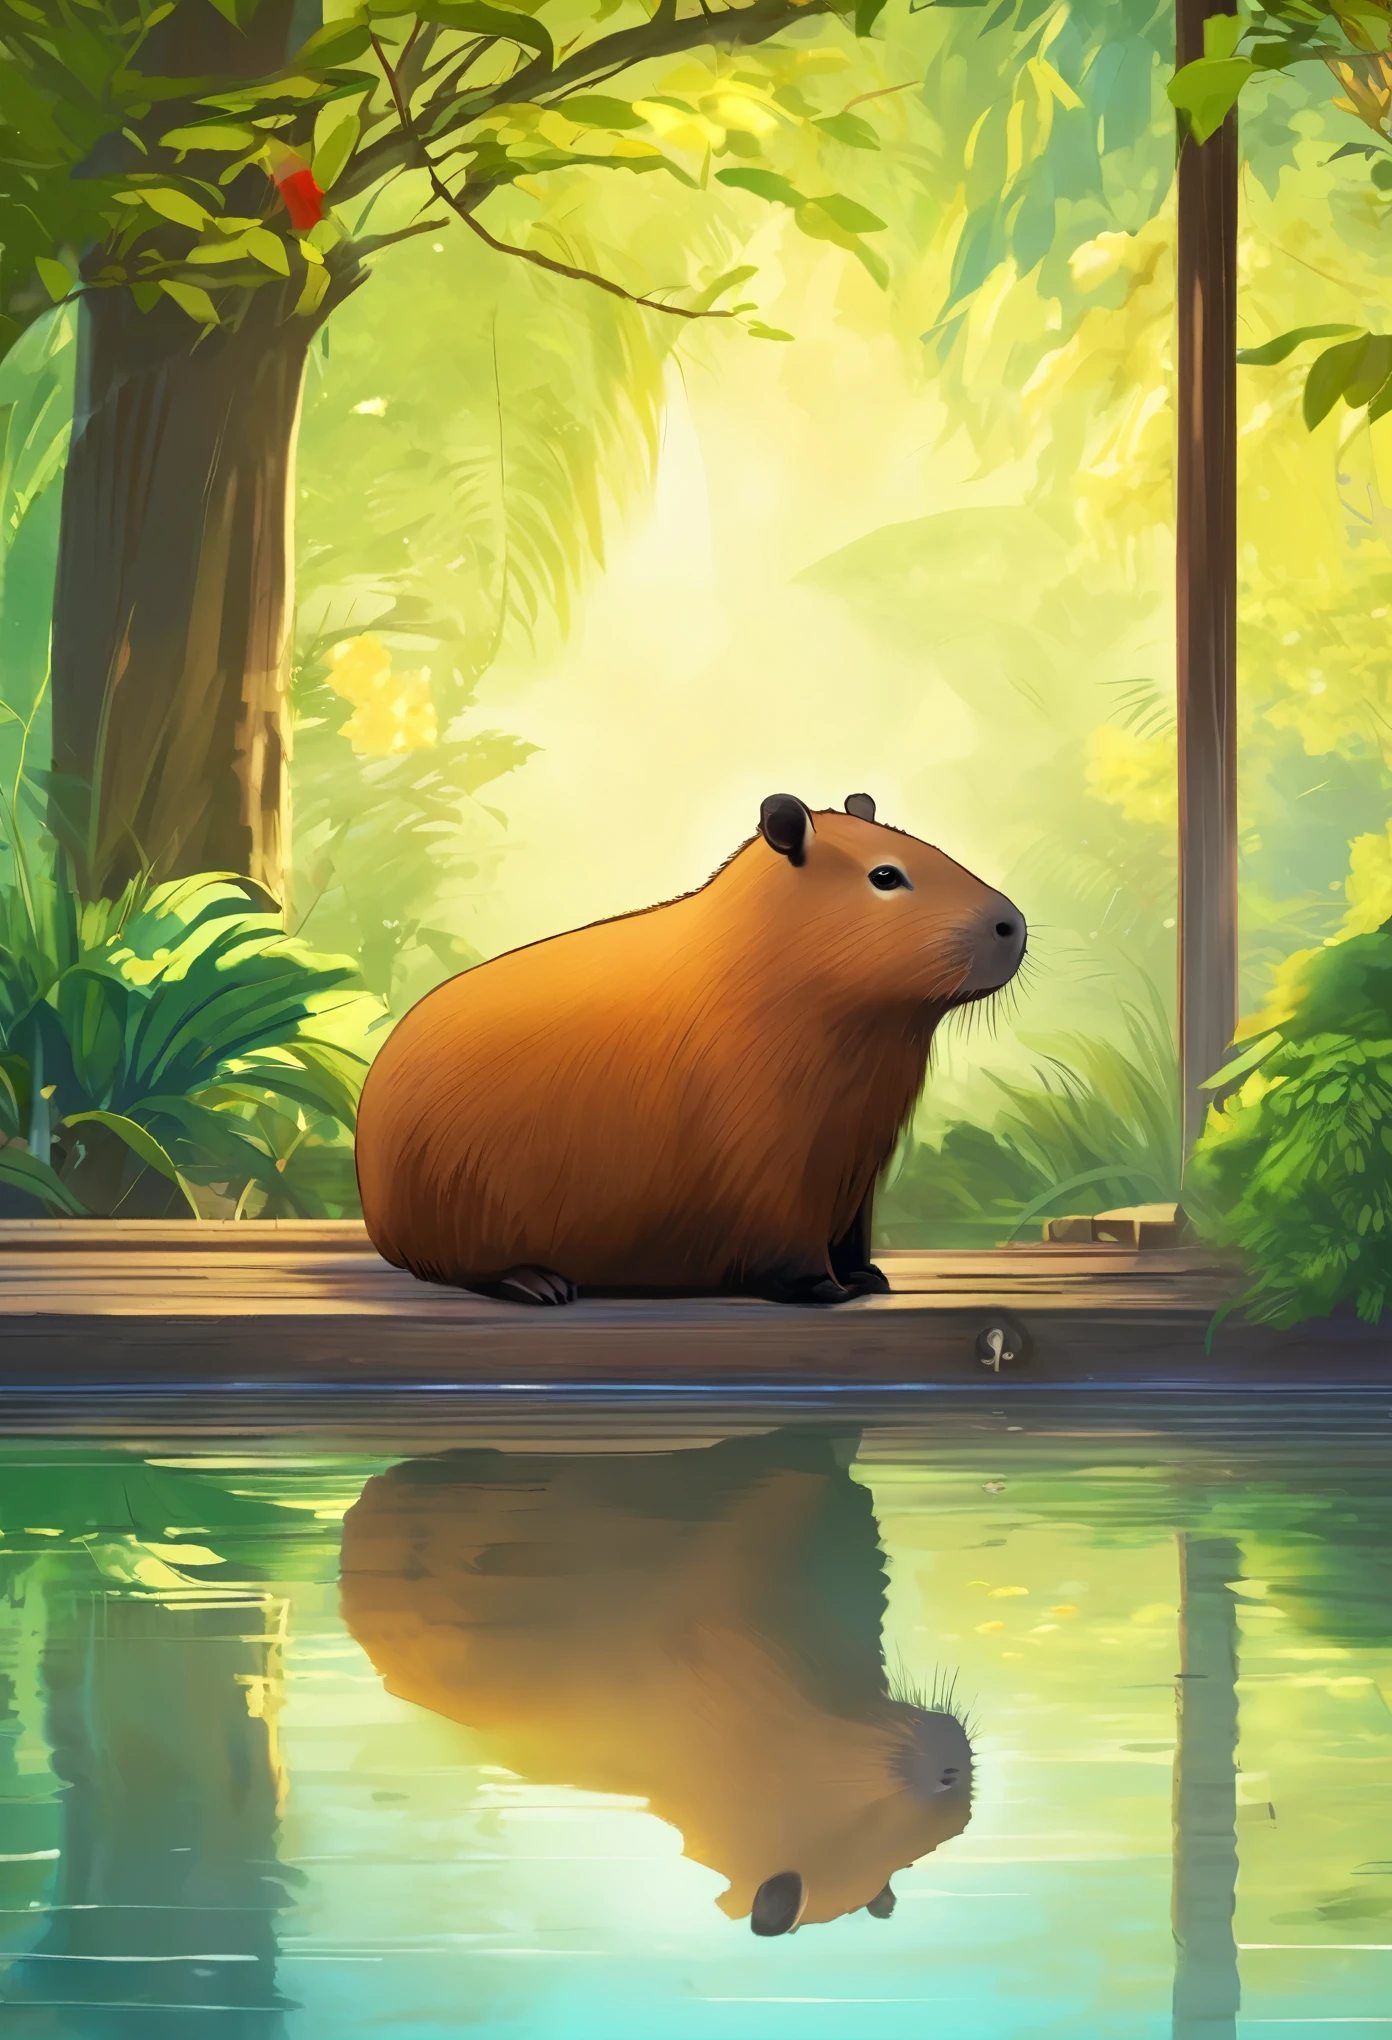 ((Hot springs with capybaras))、One Capybara:1.2、Cozy atmosphere、Rising steam、Lush vegetation、Relaxing bath、Calm colors、Ripples on a calm water surface、Calm atmosphere tranquility、A faint mist in the air、A sense of harmony and serenity、A delightful encounter with nature、A relaxing experience、A moment of blissful escape。 (highest quality、4k、8k、High resolution、masterpiece: 1.2)、Super detailed、(Real、Photorealistic、Photorealistic: 1.37)、HDR、UHD、Studio Lighting、Bright colors、Bokeh。